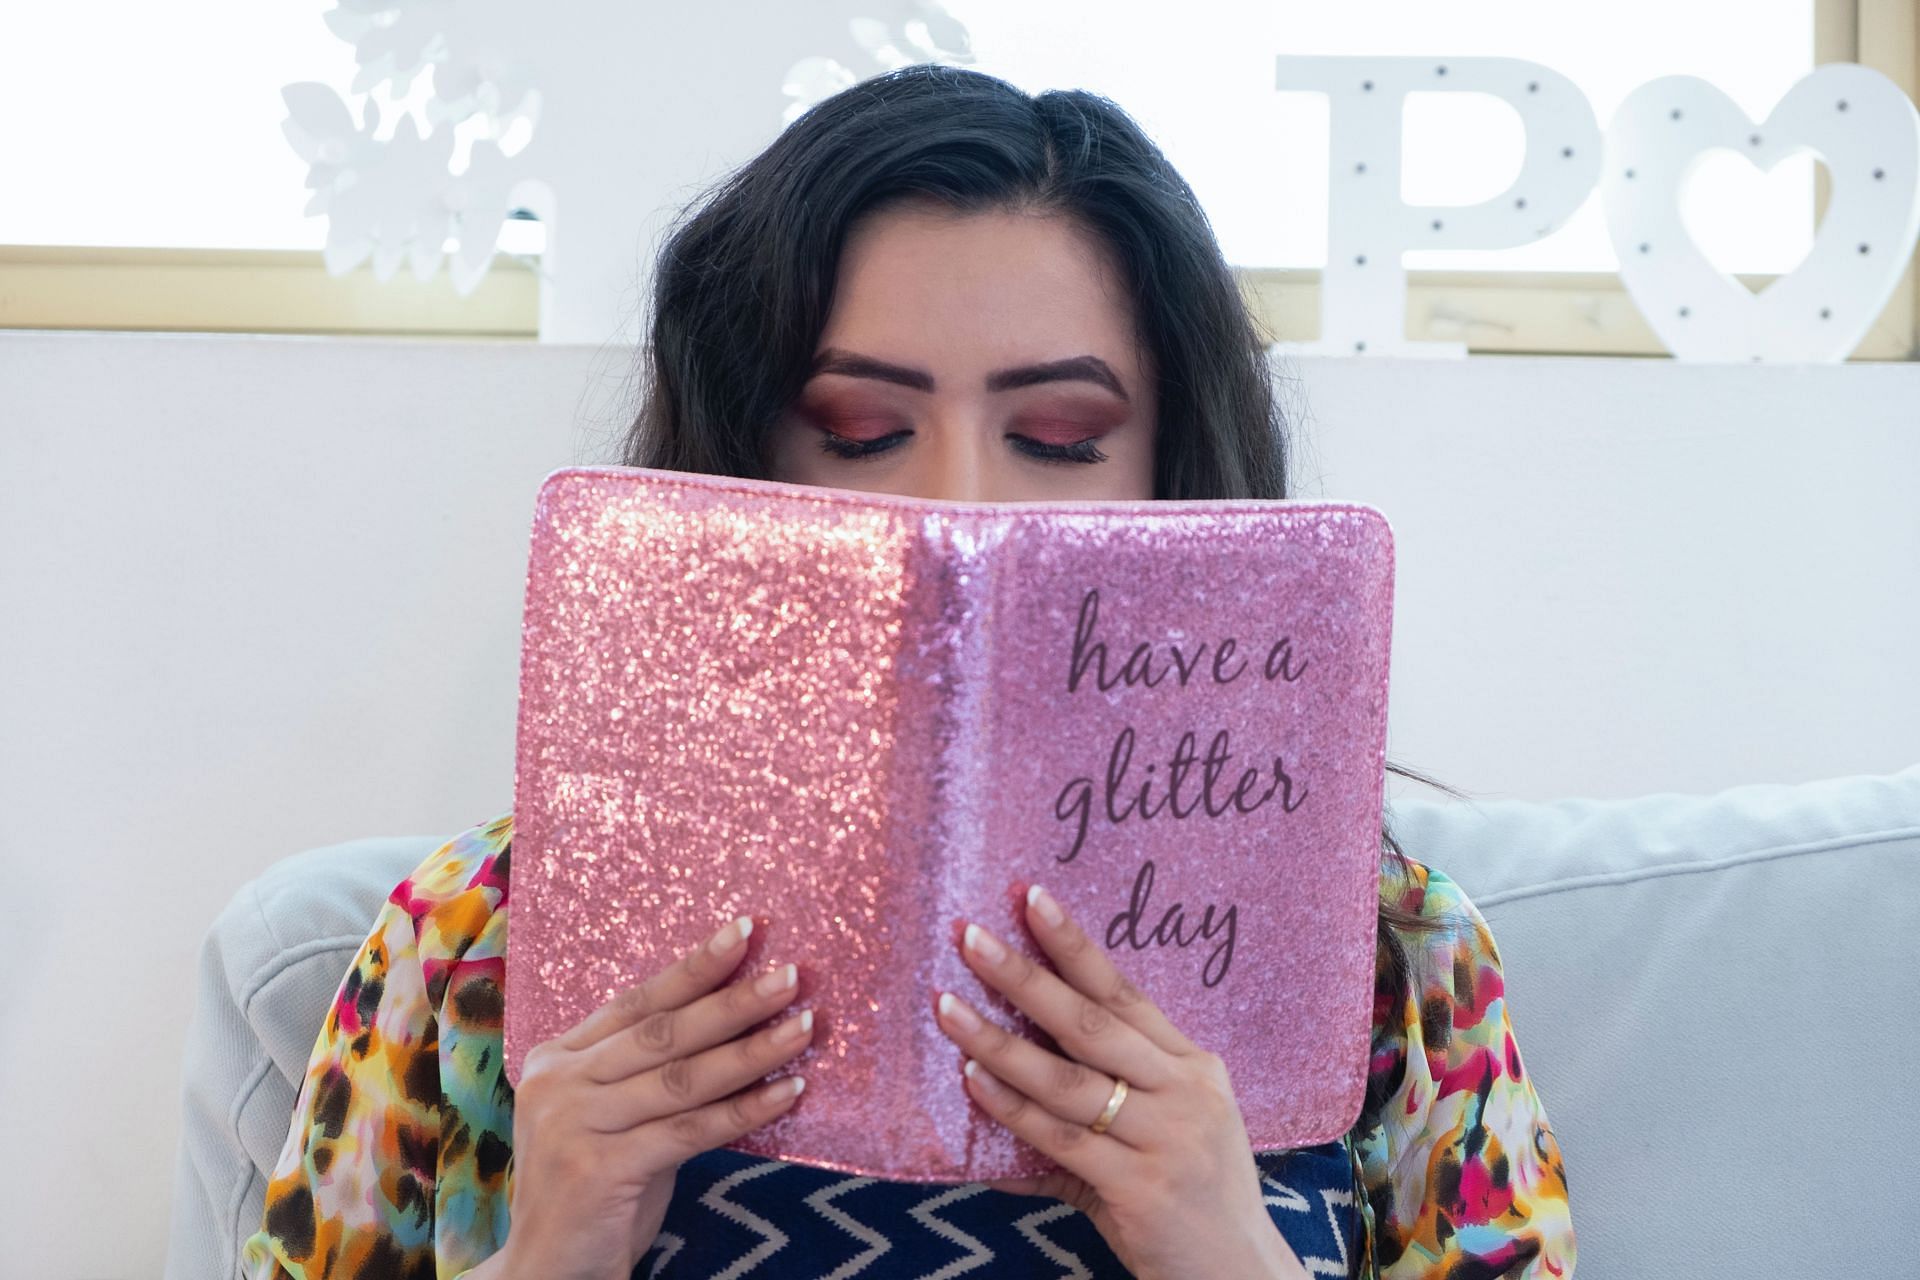 Have a glittery day ahead! (Image via Pexels/ the lazy artist)